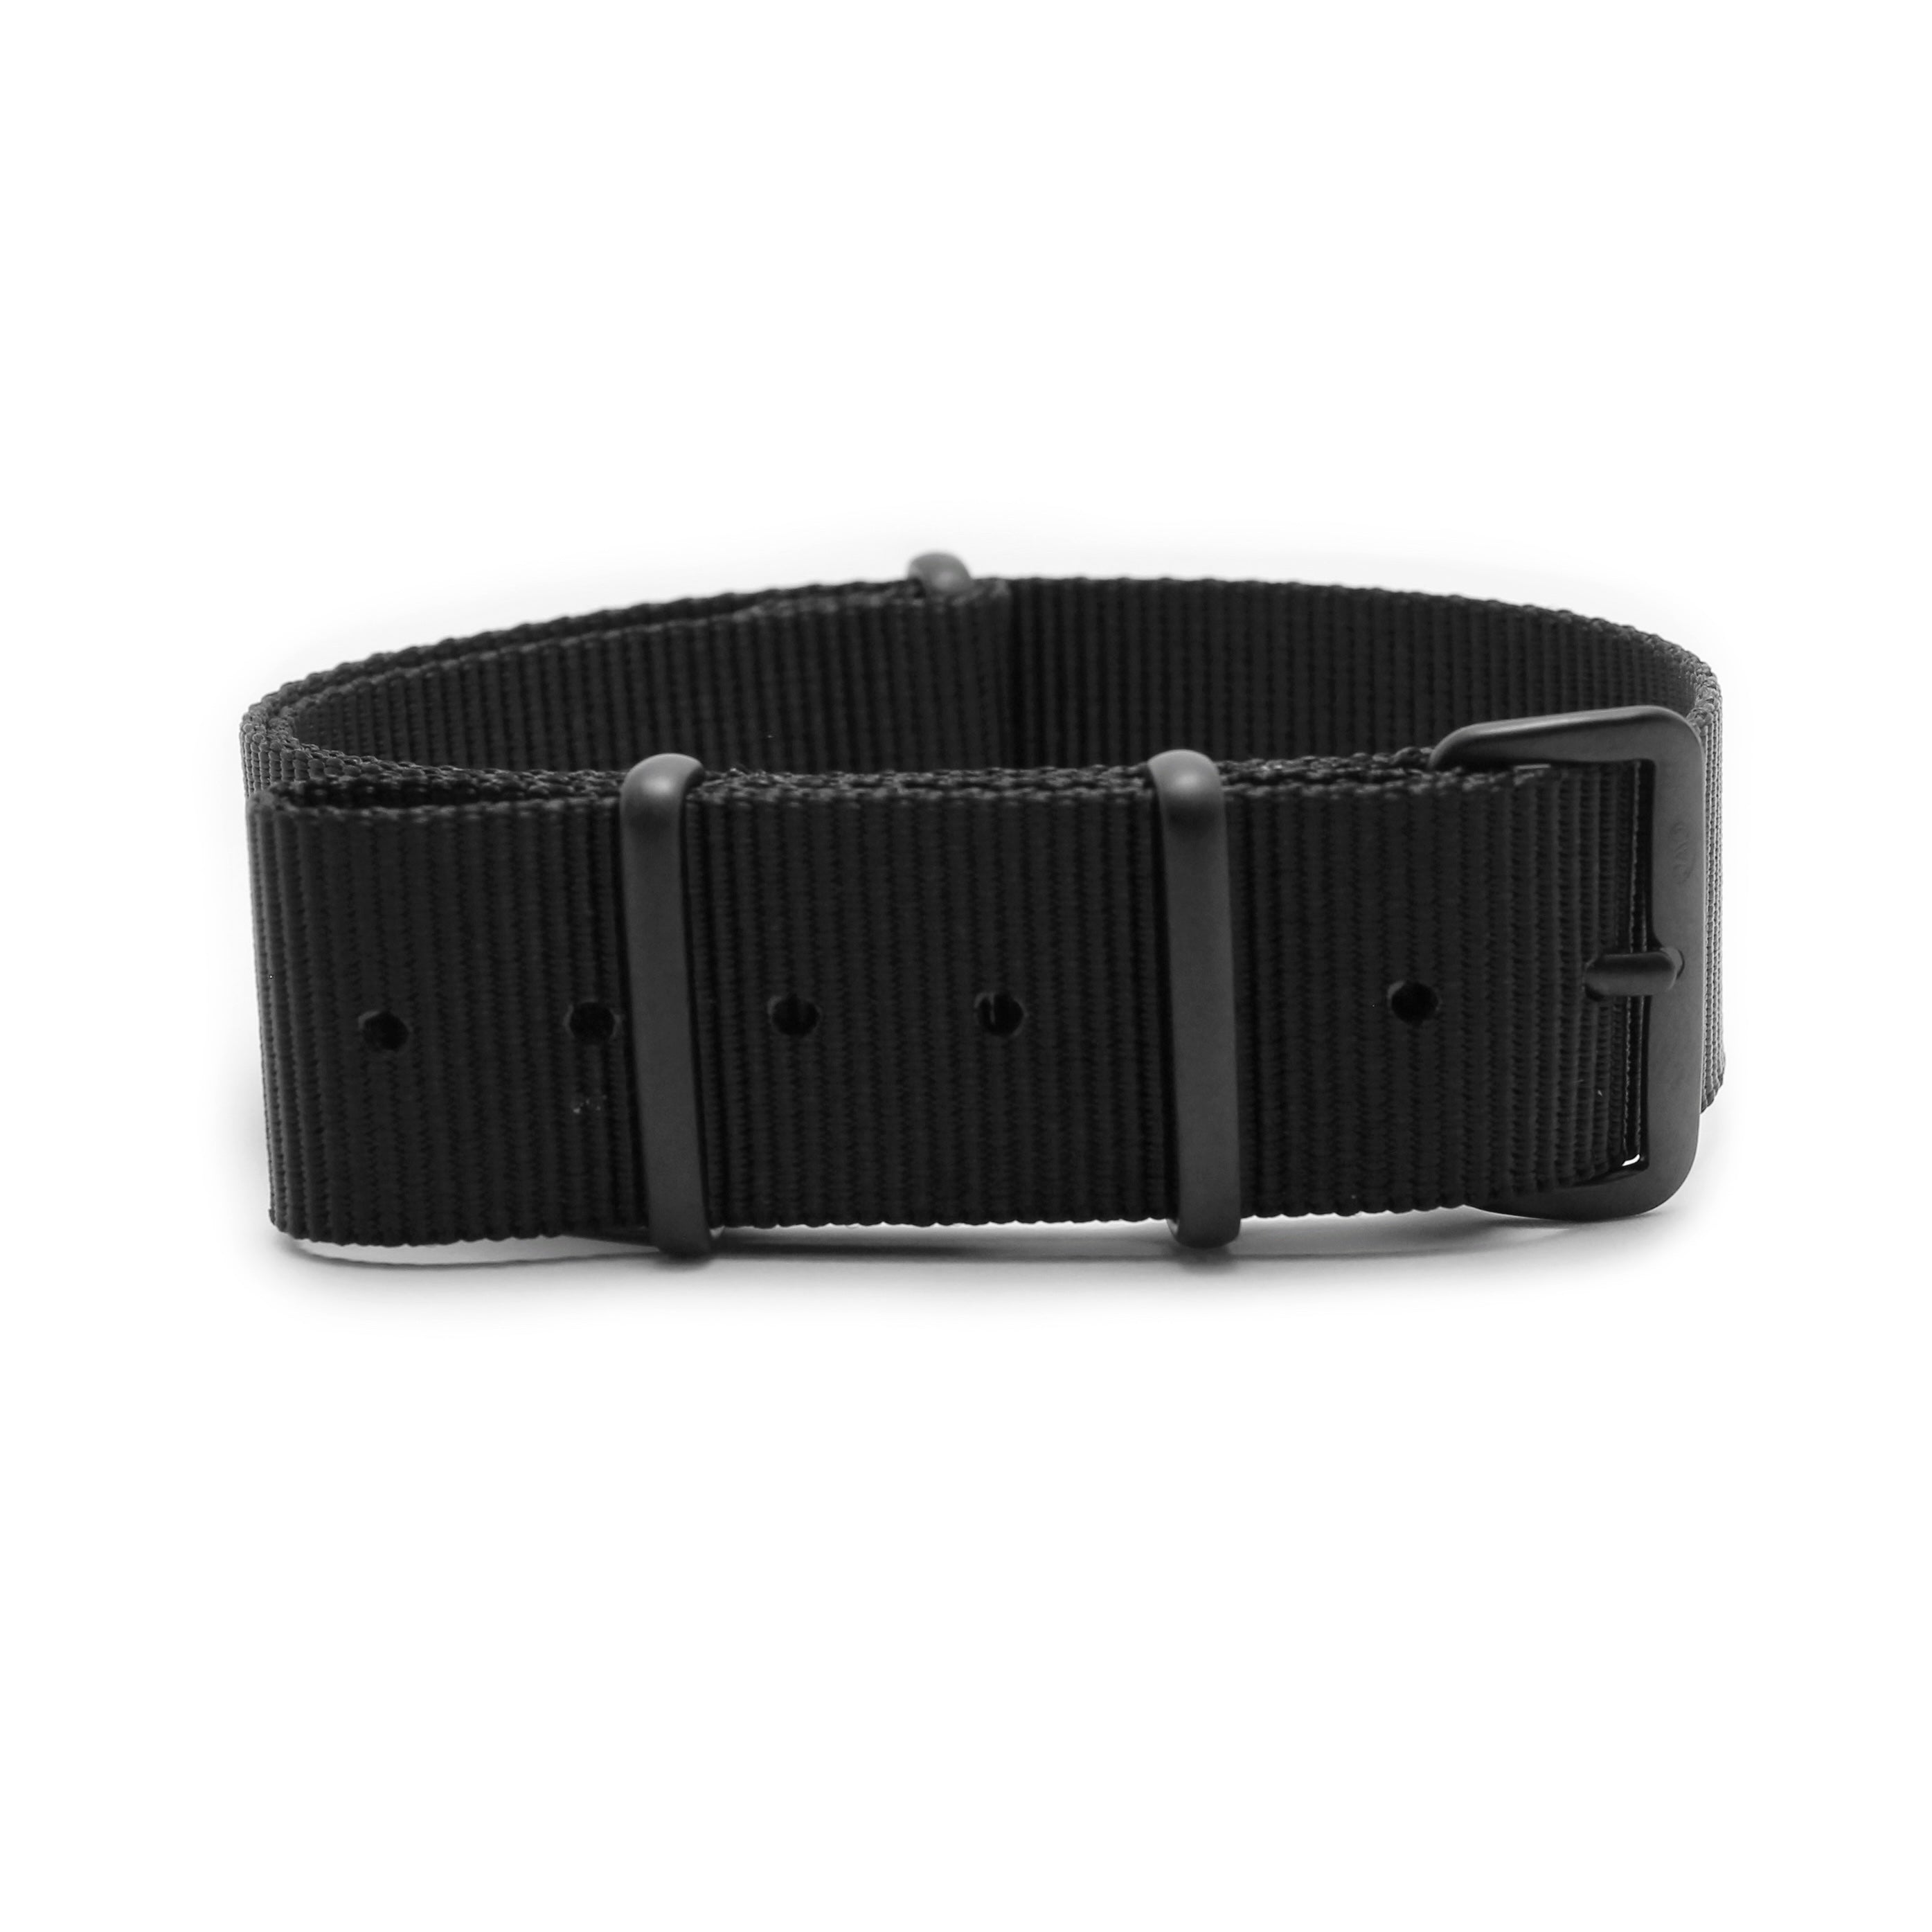 CWC DIVERS LONG WATCH STRAP - BLACK WITH BLACK BUCKLE